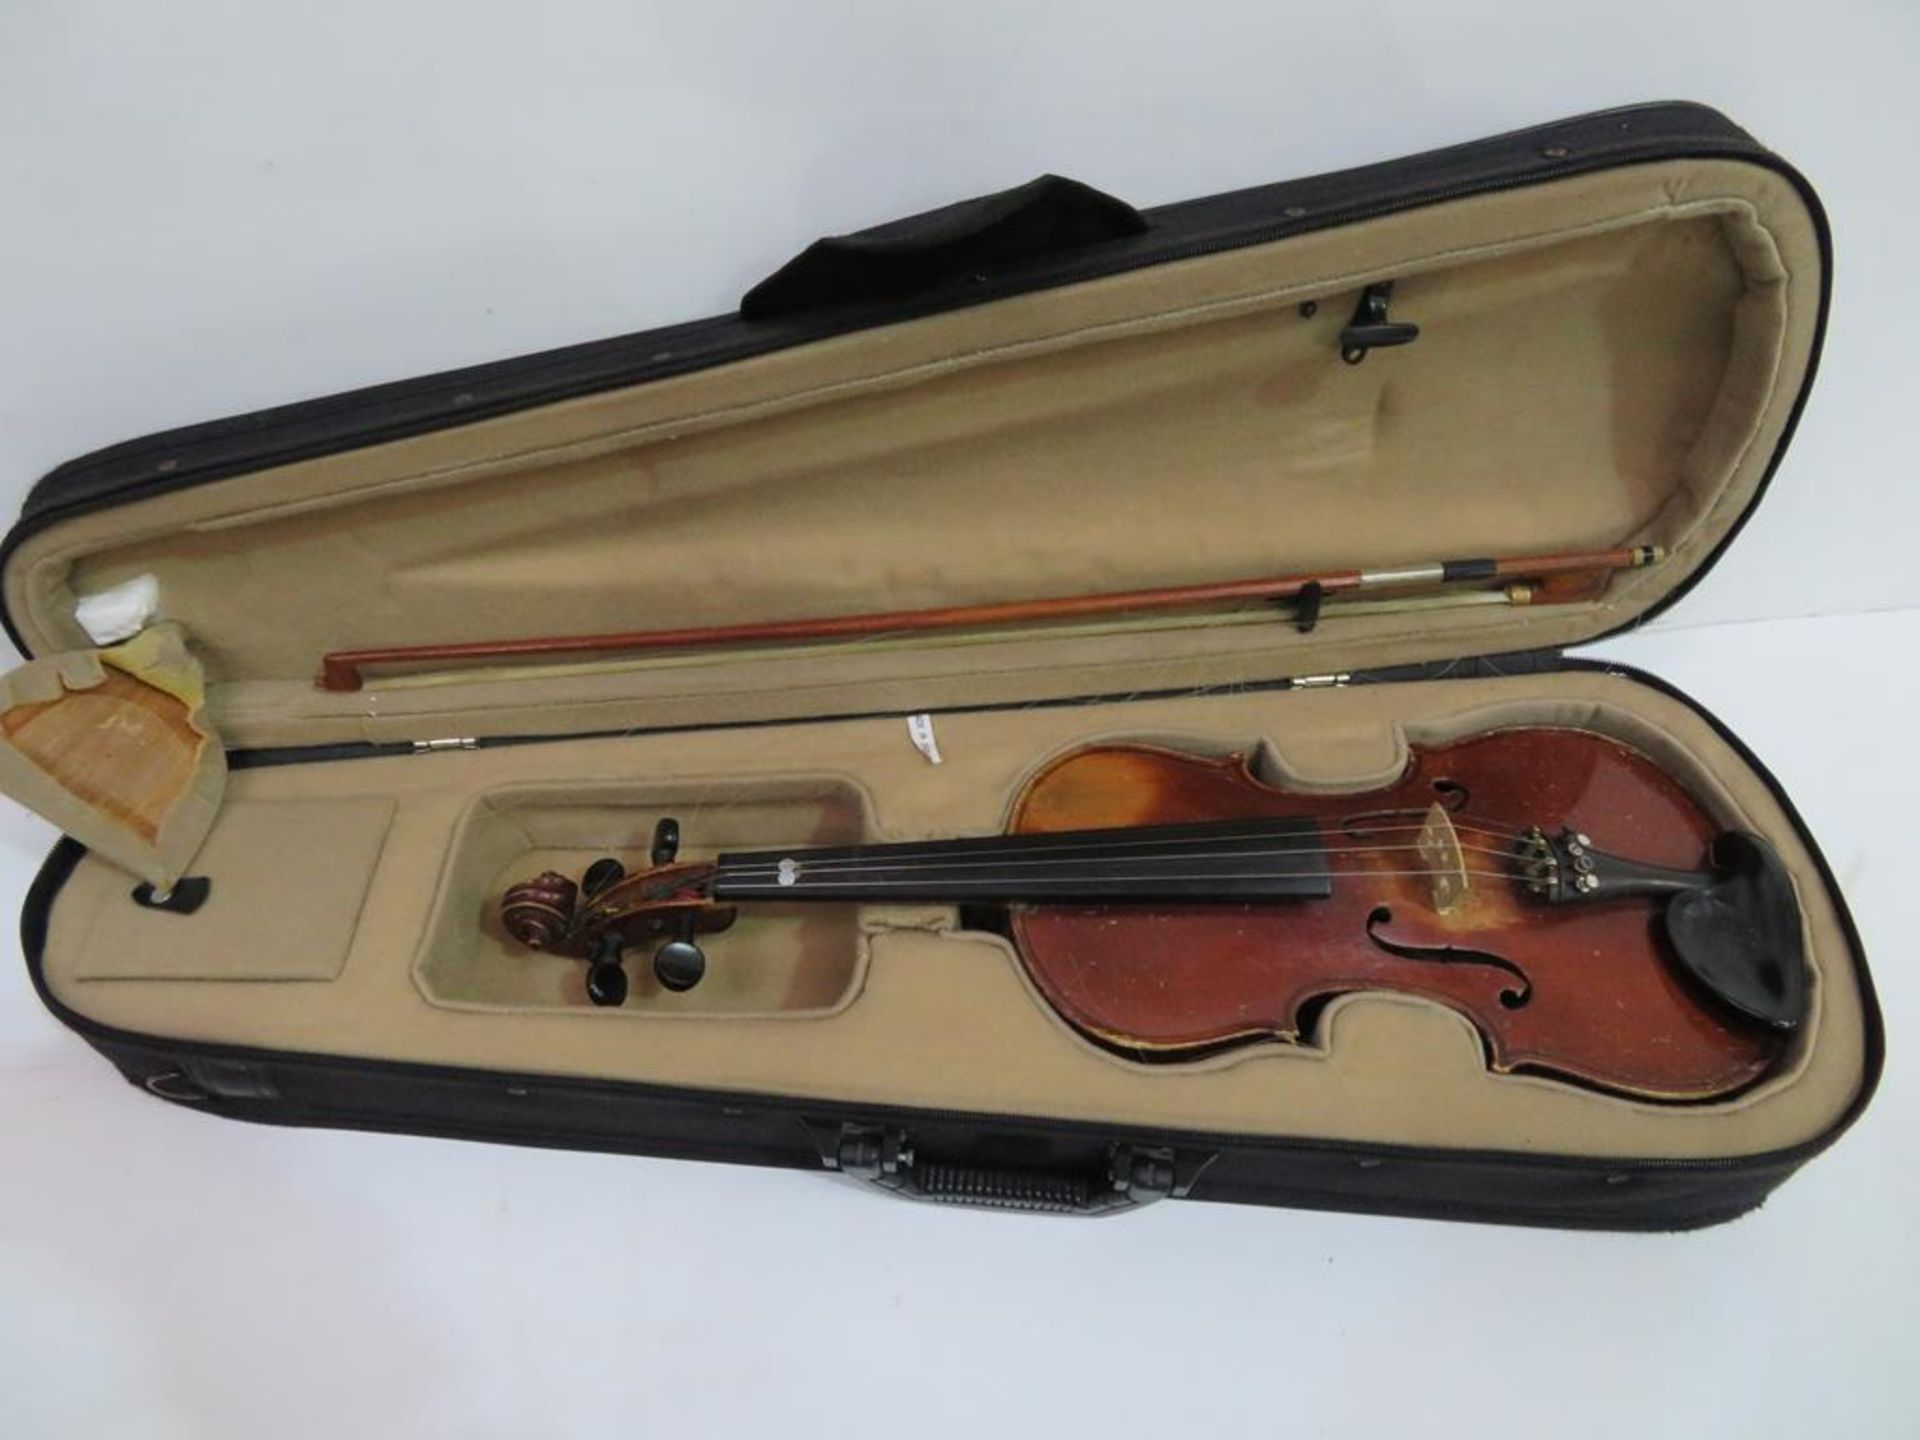 Three cased 3/4 size Violins to include two 'Lark' and one 'The Maidstone Murdoch & Co London E.C' - Image 7 of 16